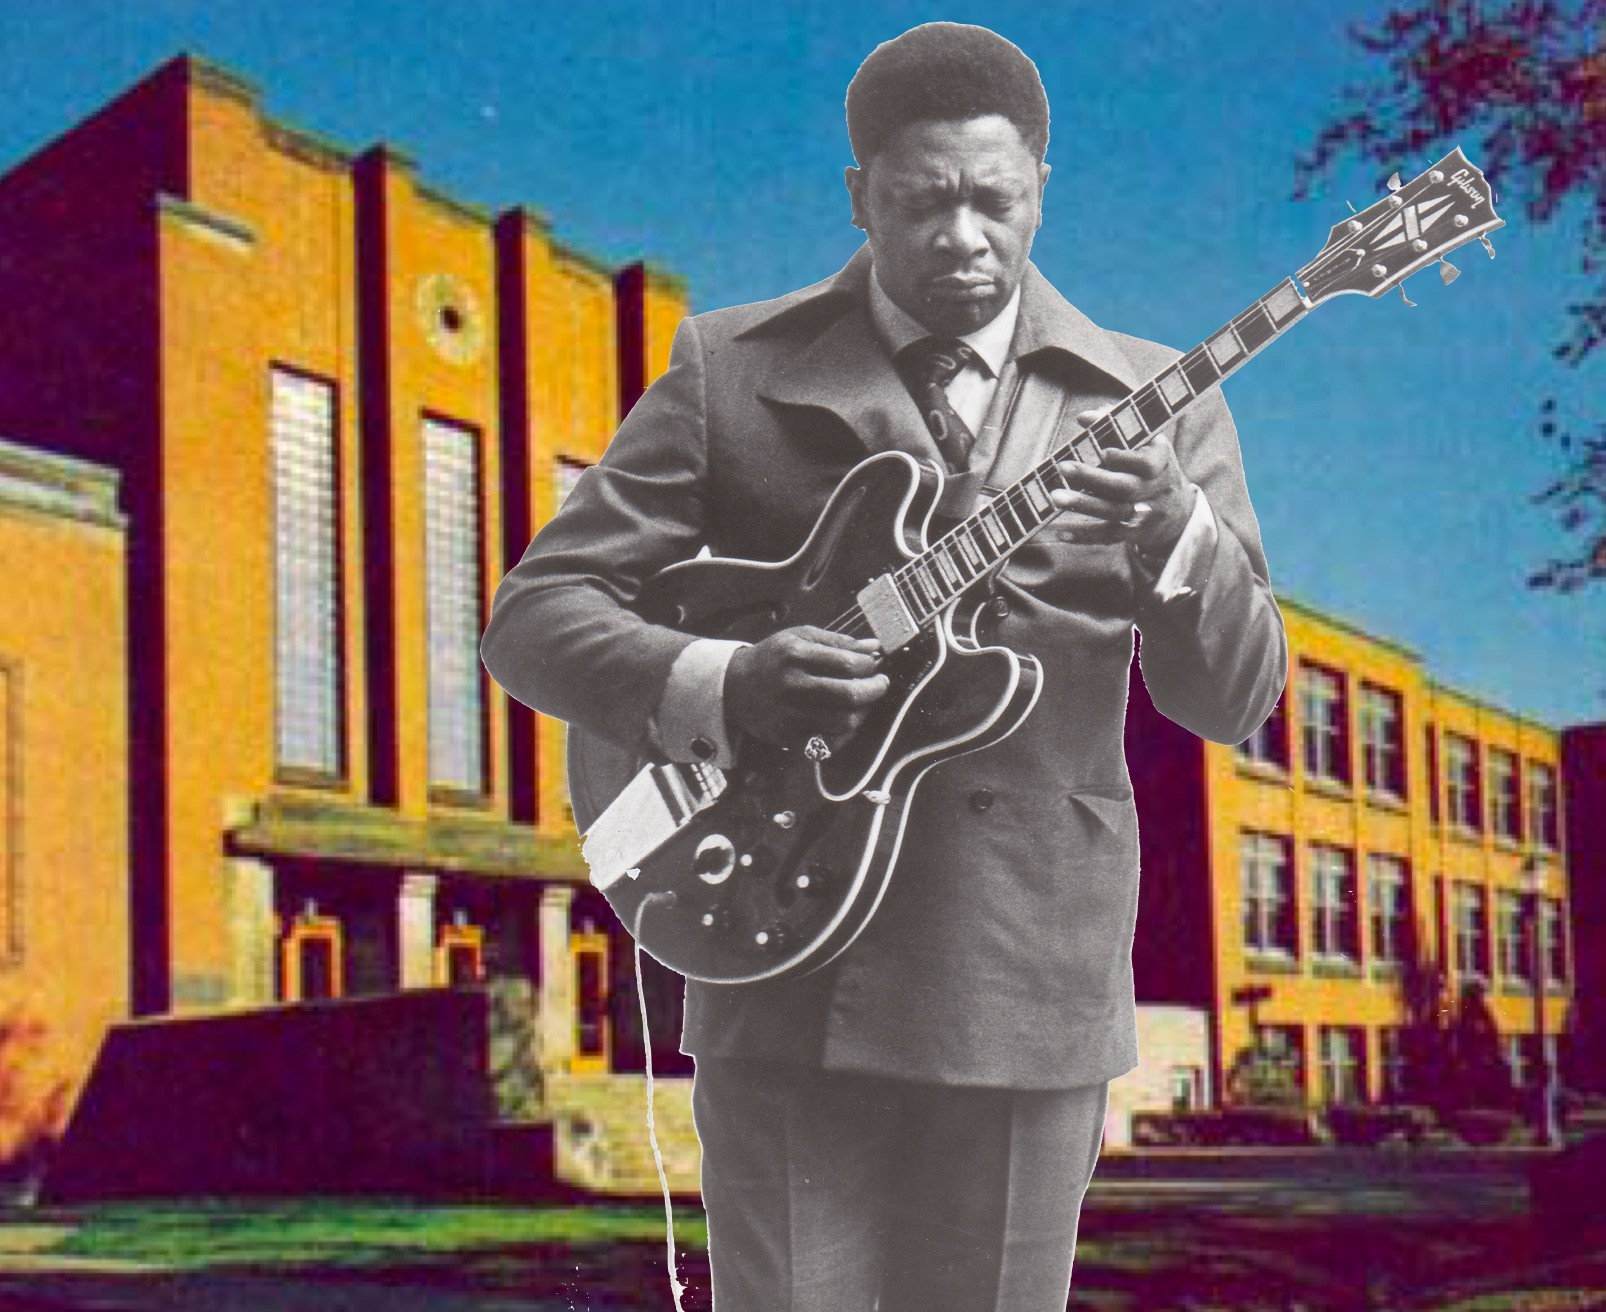 Black and white image of B.B. King playing guitar overlaid on a colour picture of QEH School